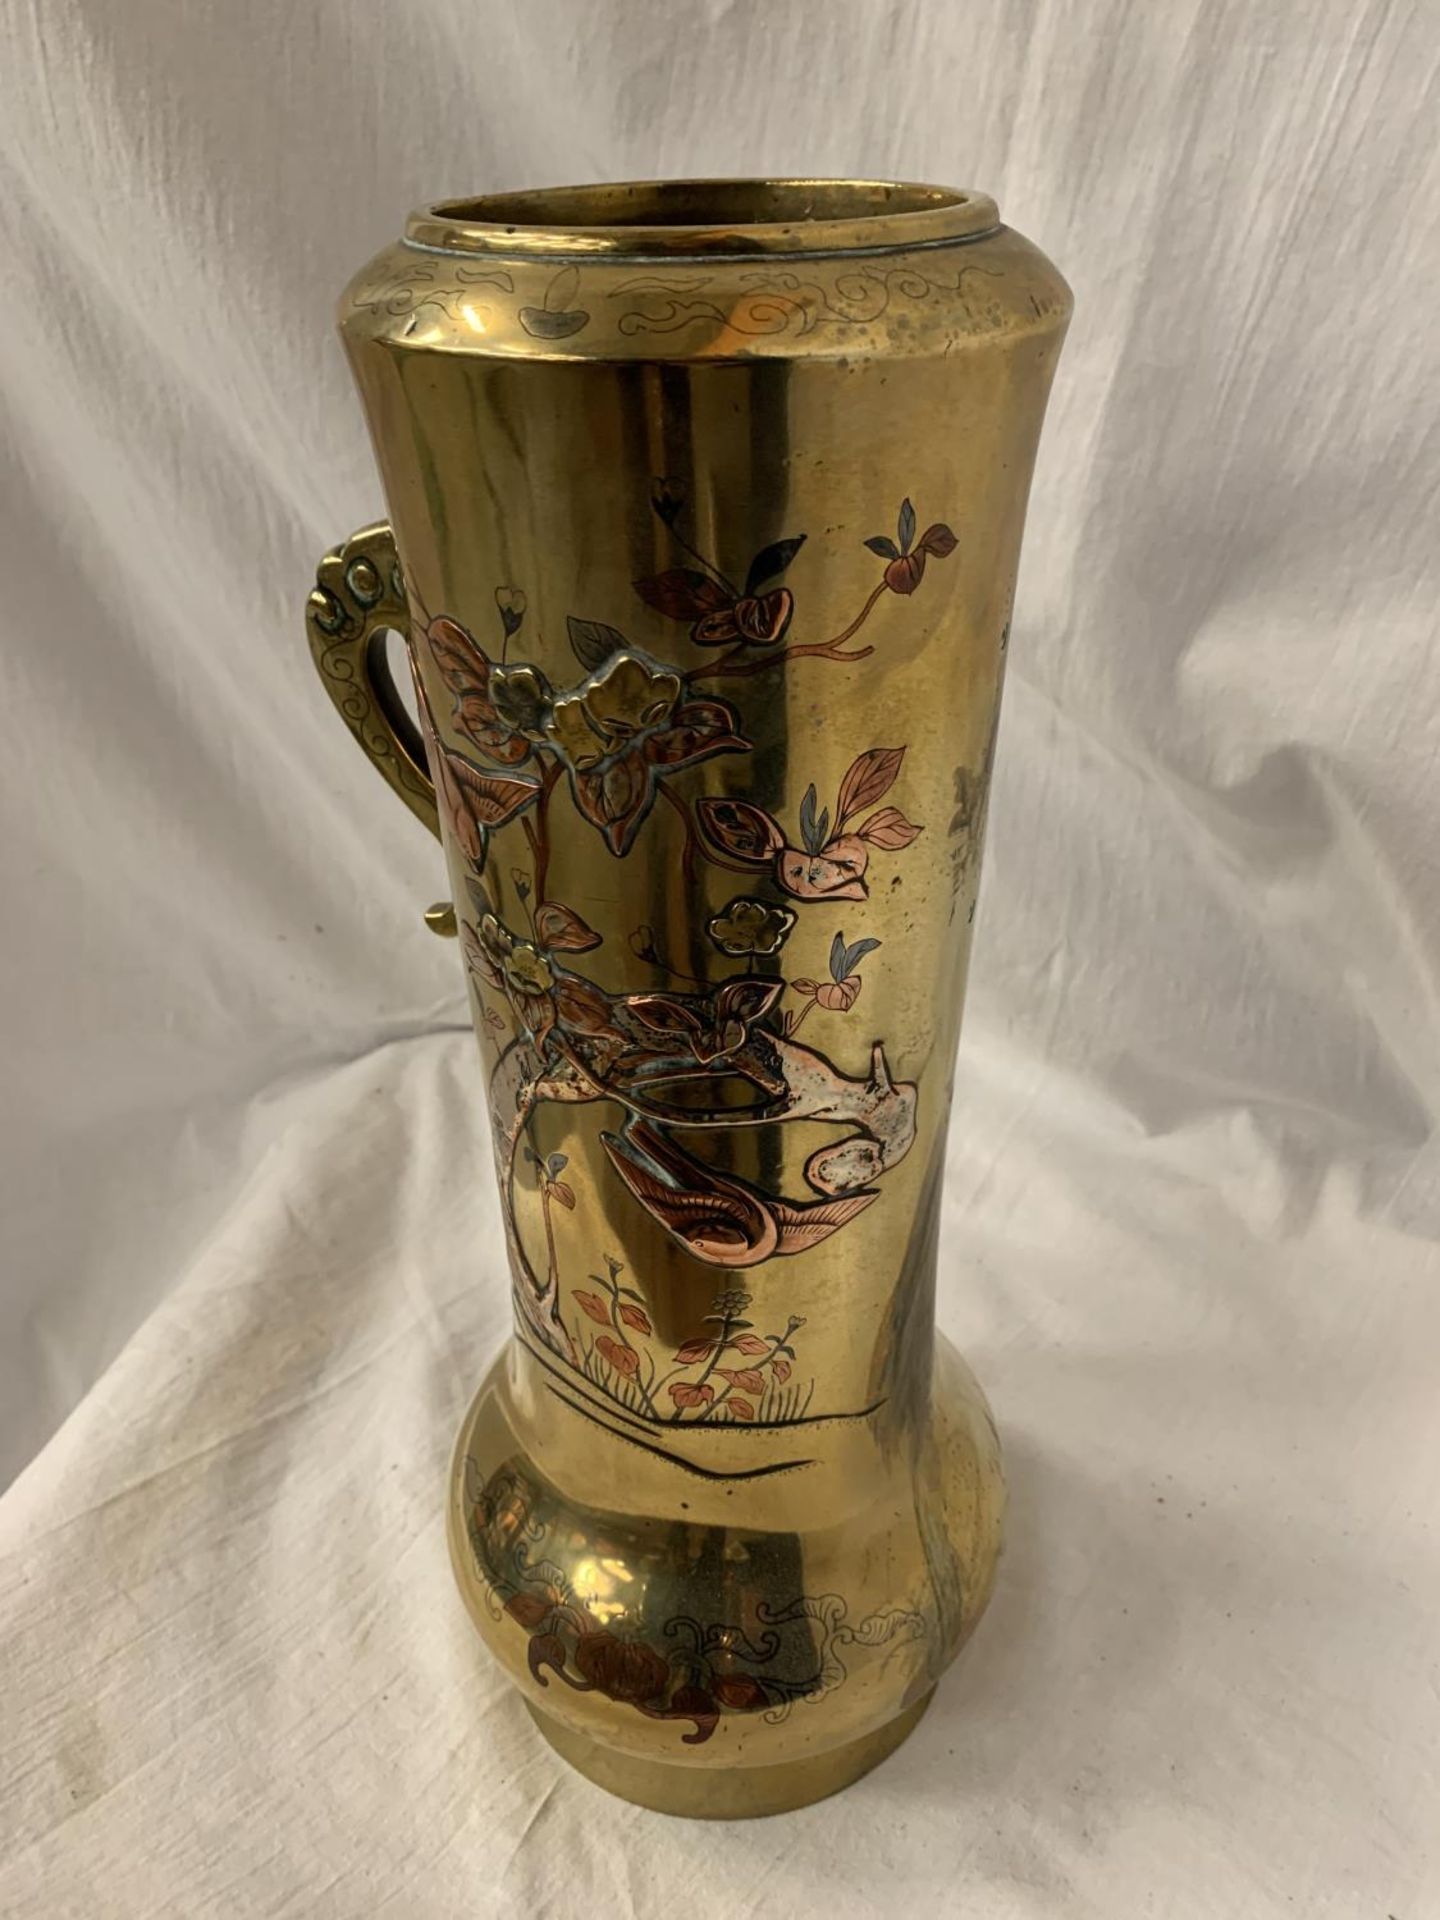 A DECORATIVE BRASS VESSEL WITH EMBOSSED COPPER AVIAN DESIGN H: 36CM - Image 2 of 4